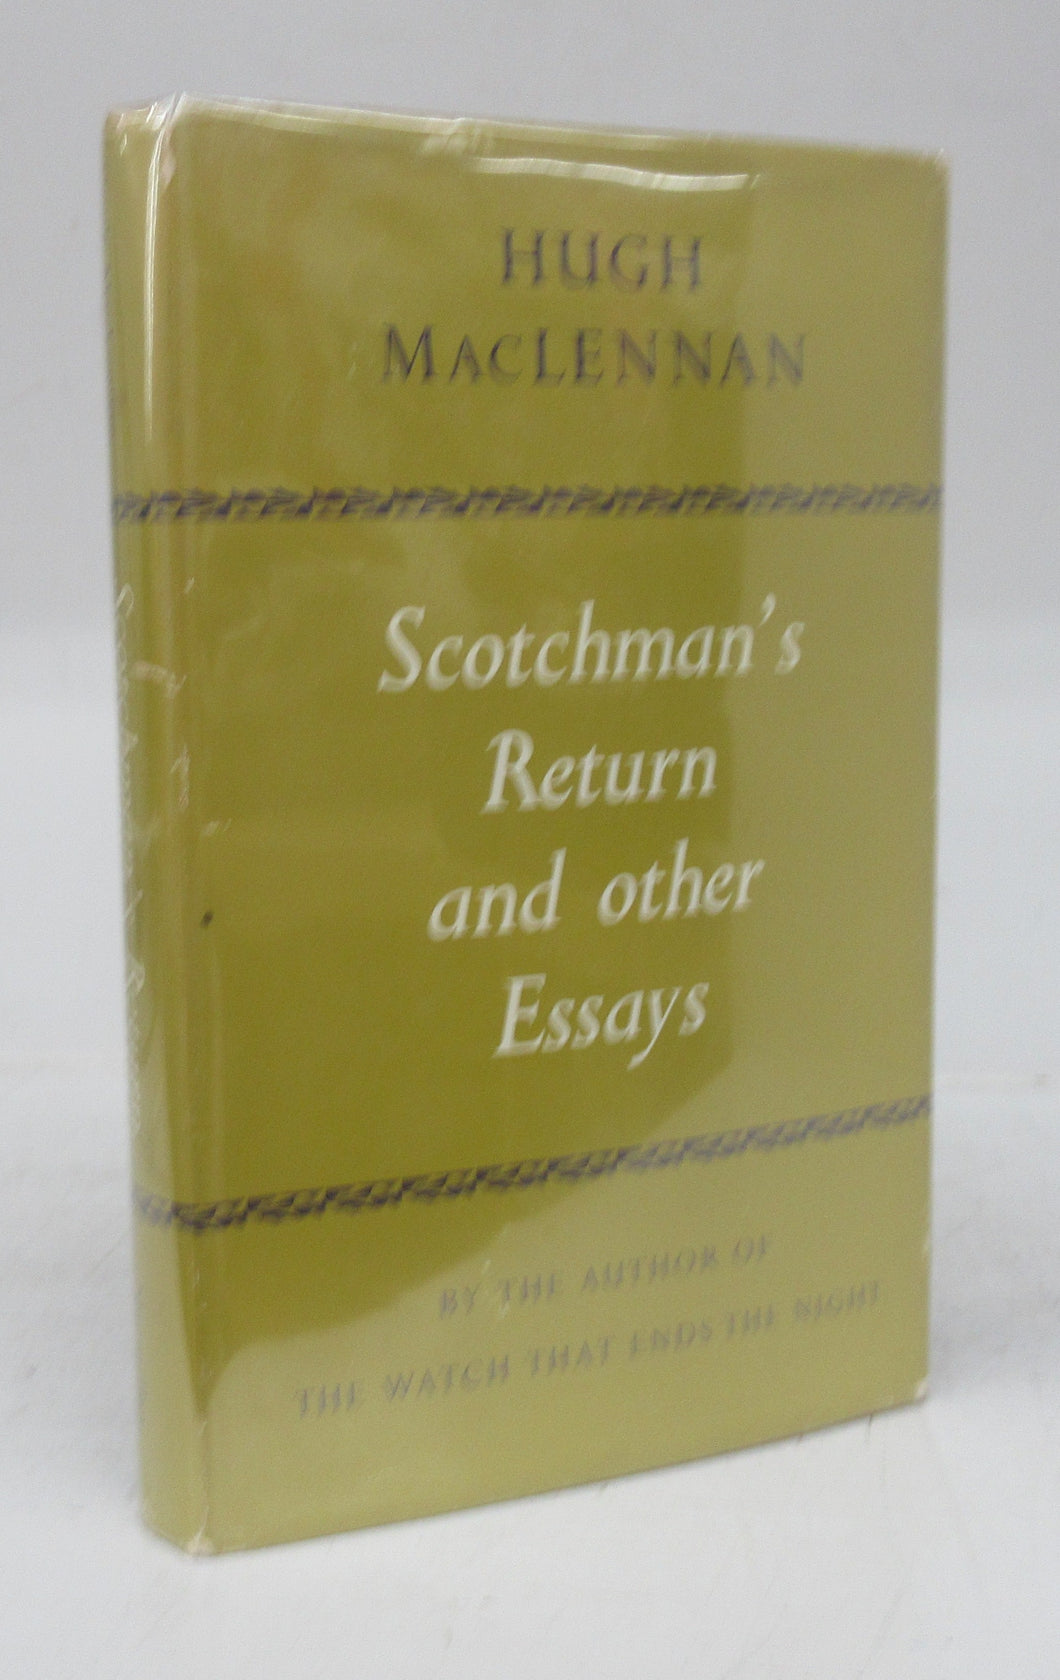 Scotchman's Return and other Essays